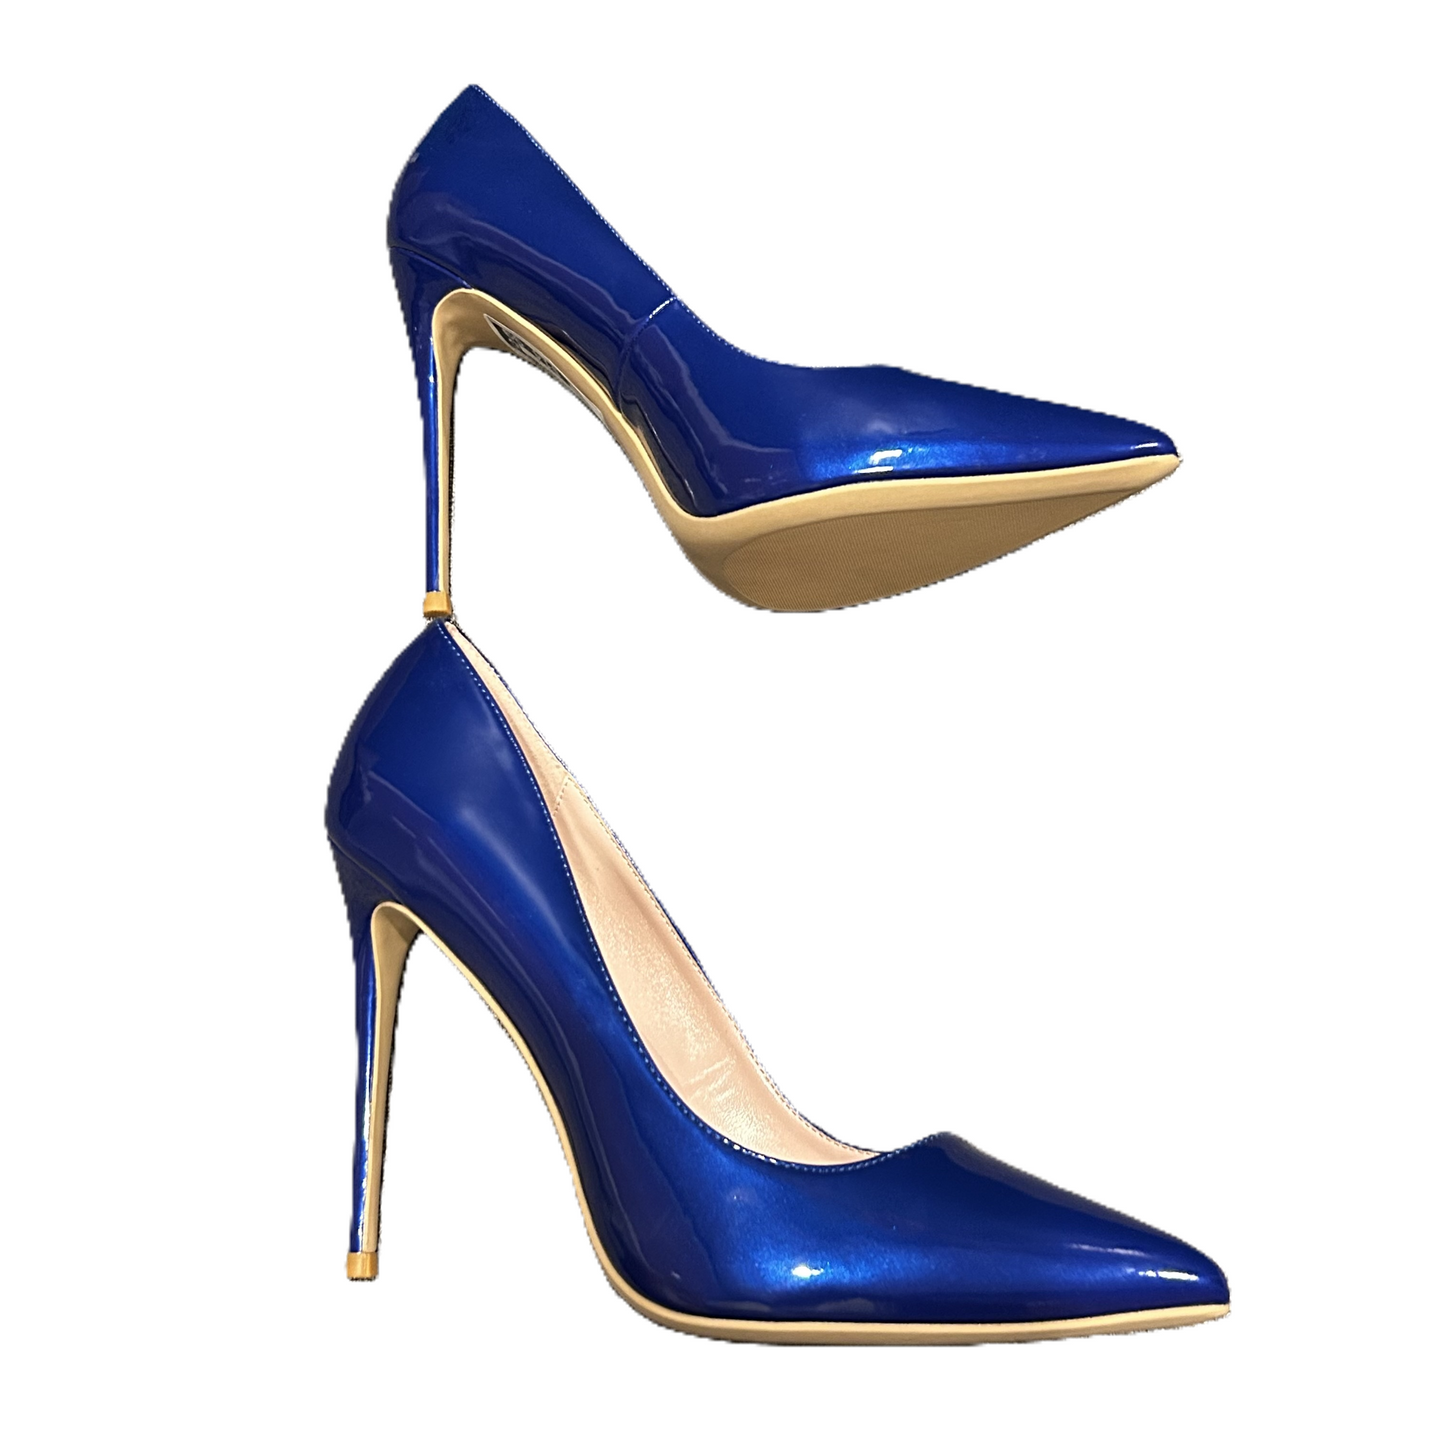 Blue Shoes Heels Stiletto By Genshuo, Size: 12